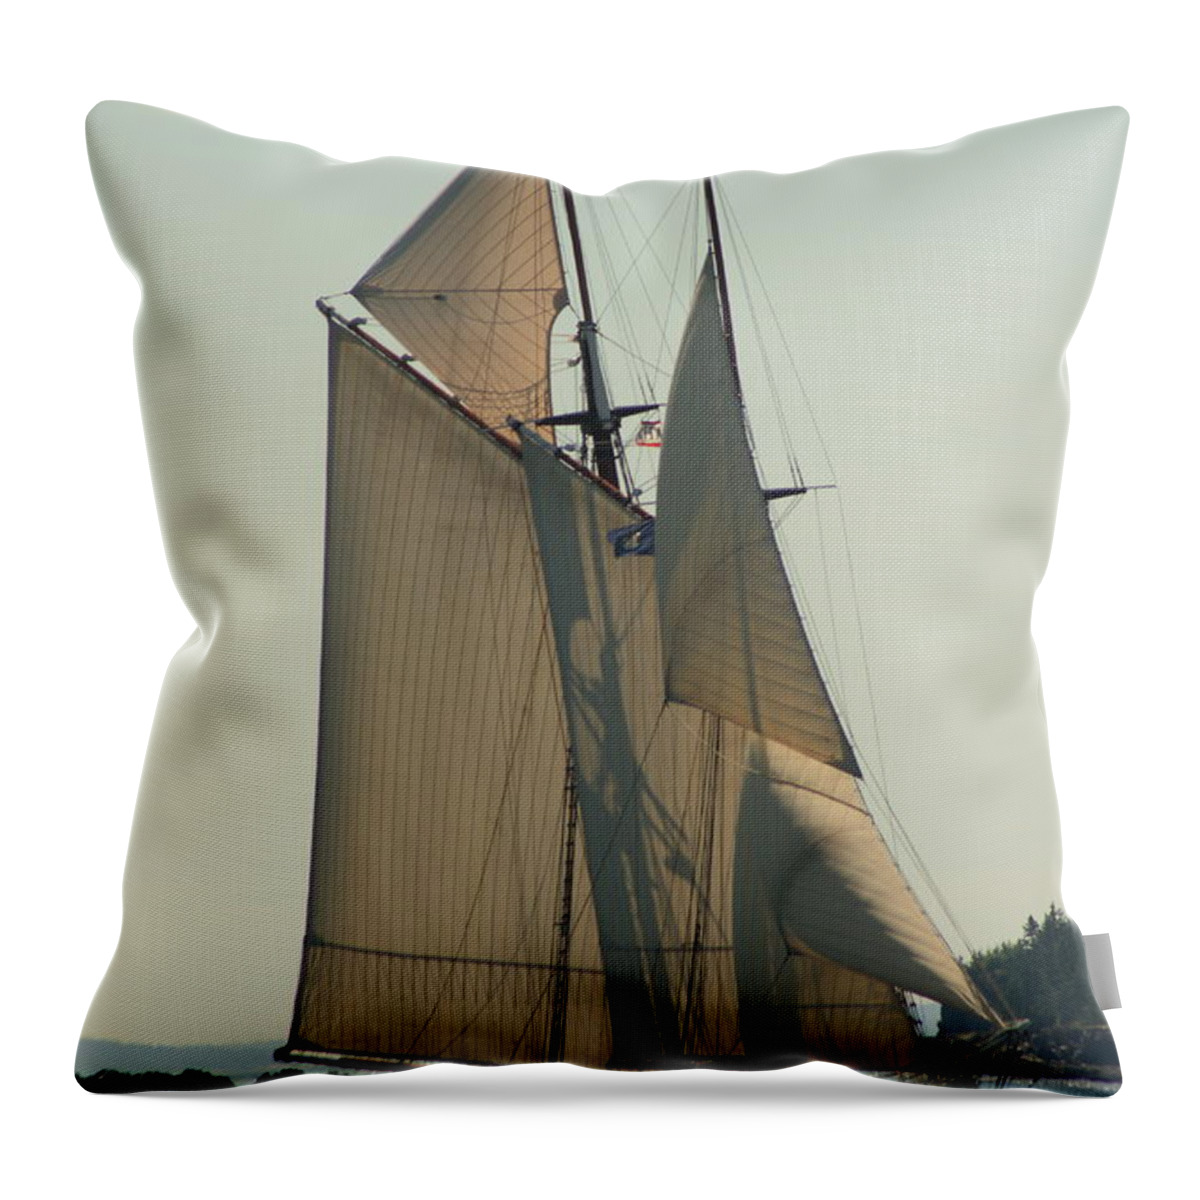 Seascape Throw Pillow featuring the photograph Heritage Homeward by Doug Mills